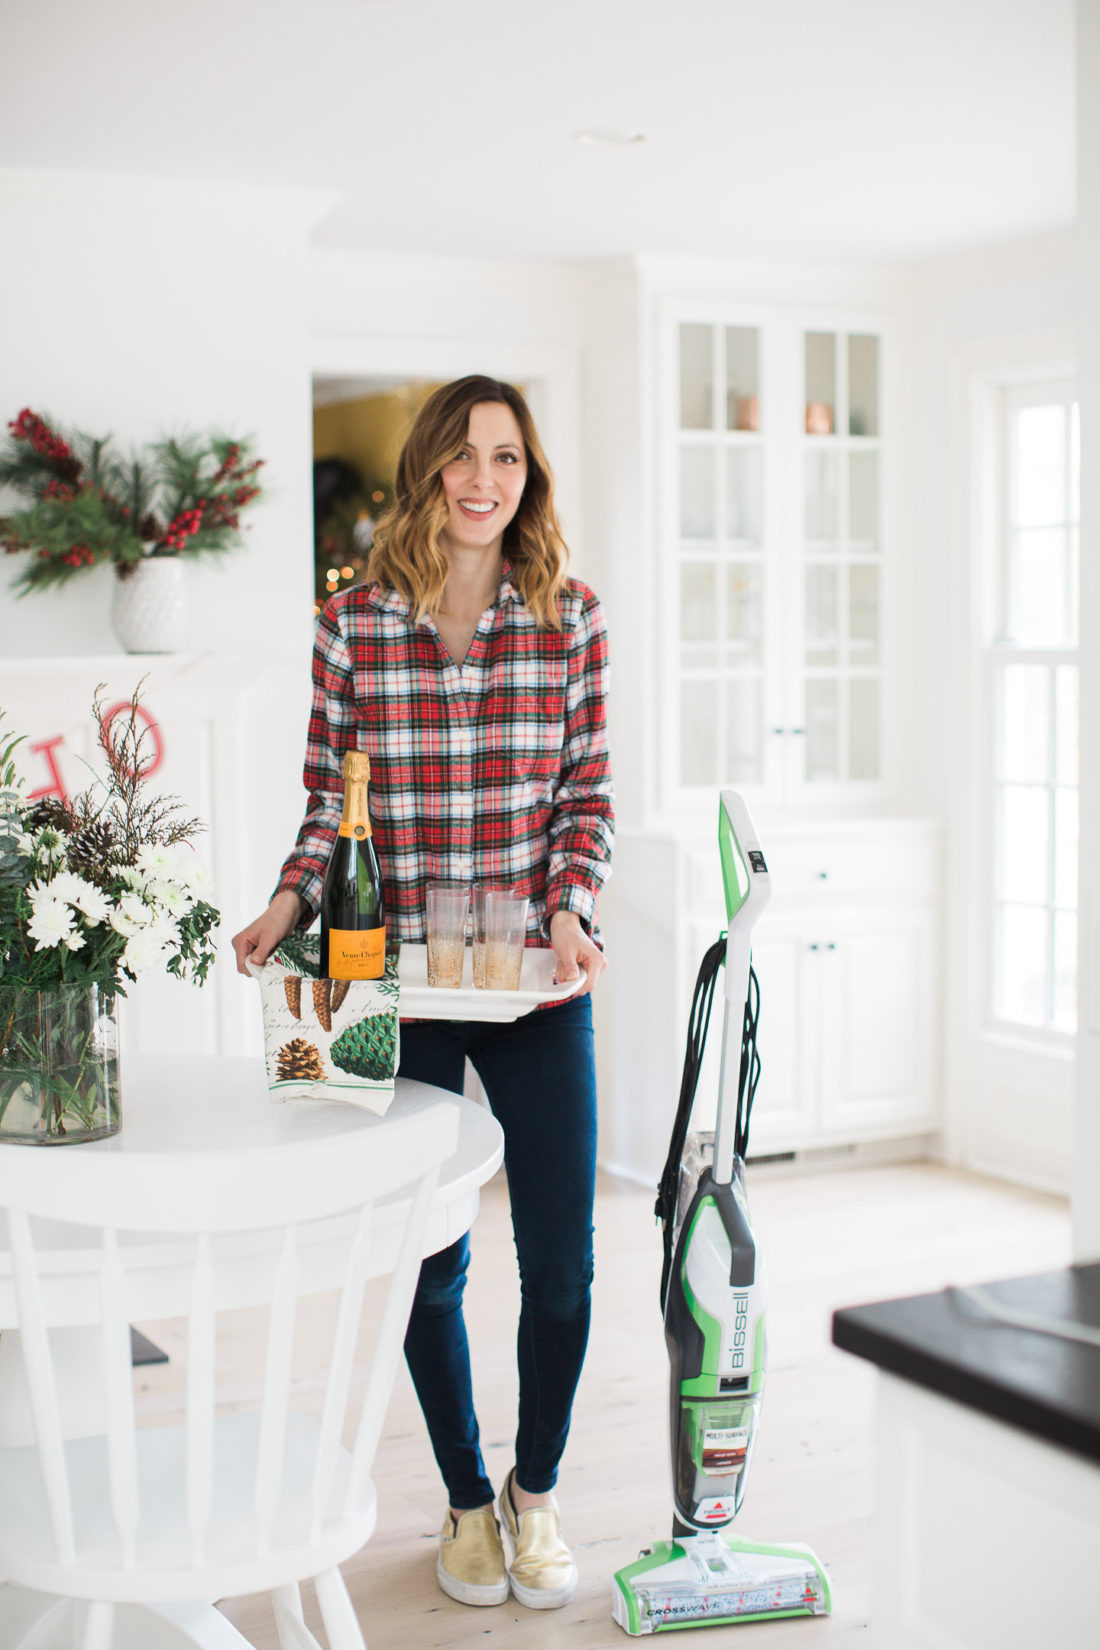 Eva Amurri Martino of lifestyle and motherhood blog Happily Eva After holds a tray of cocktails as she prepares her home for a Holiday party